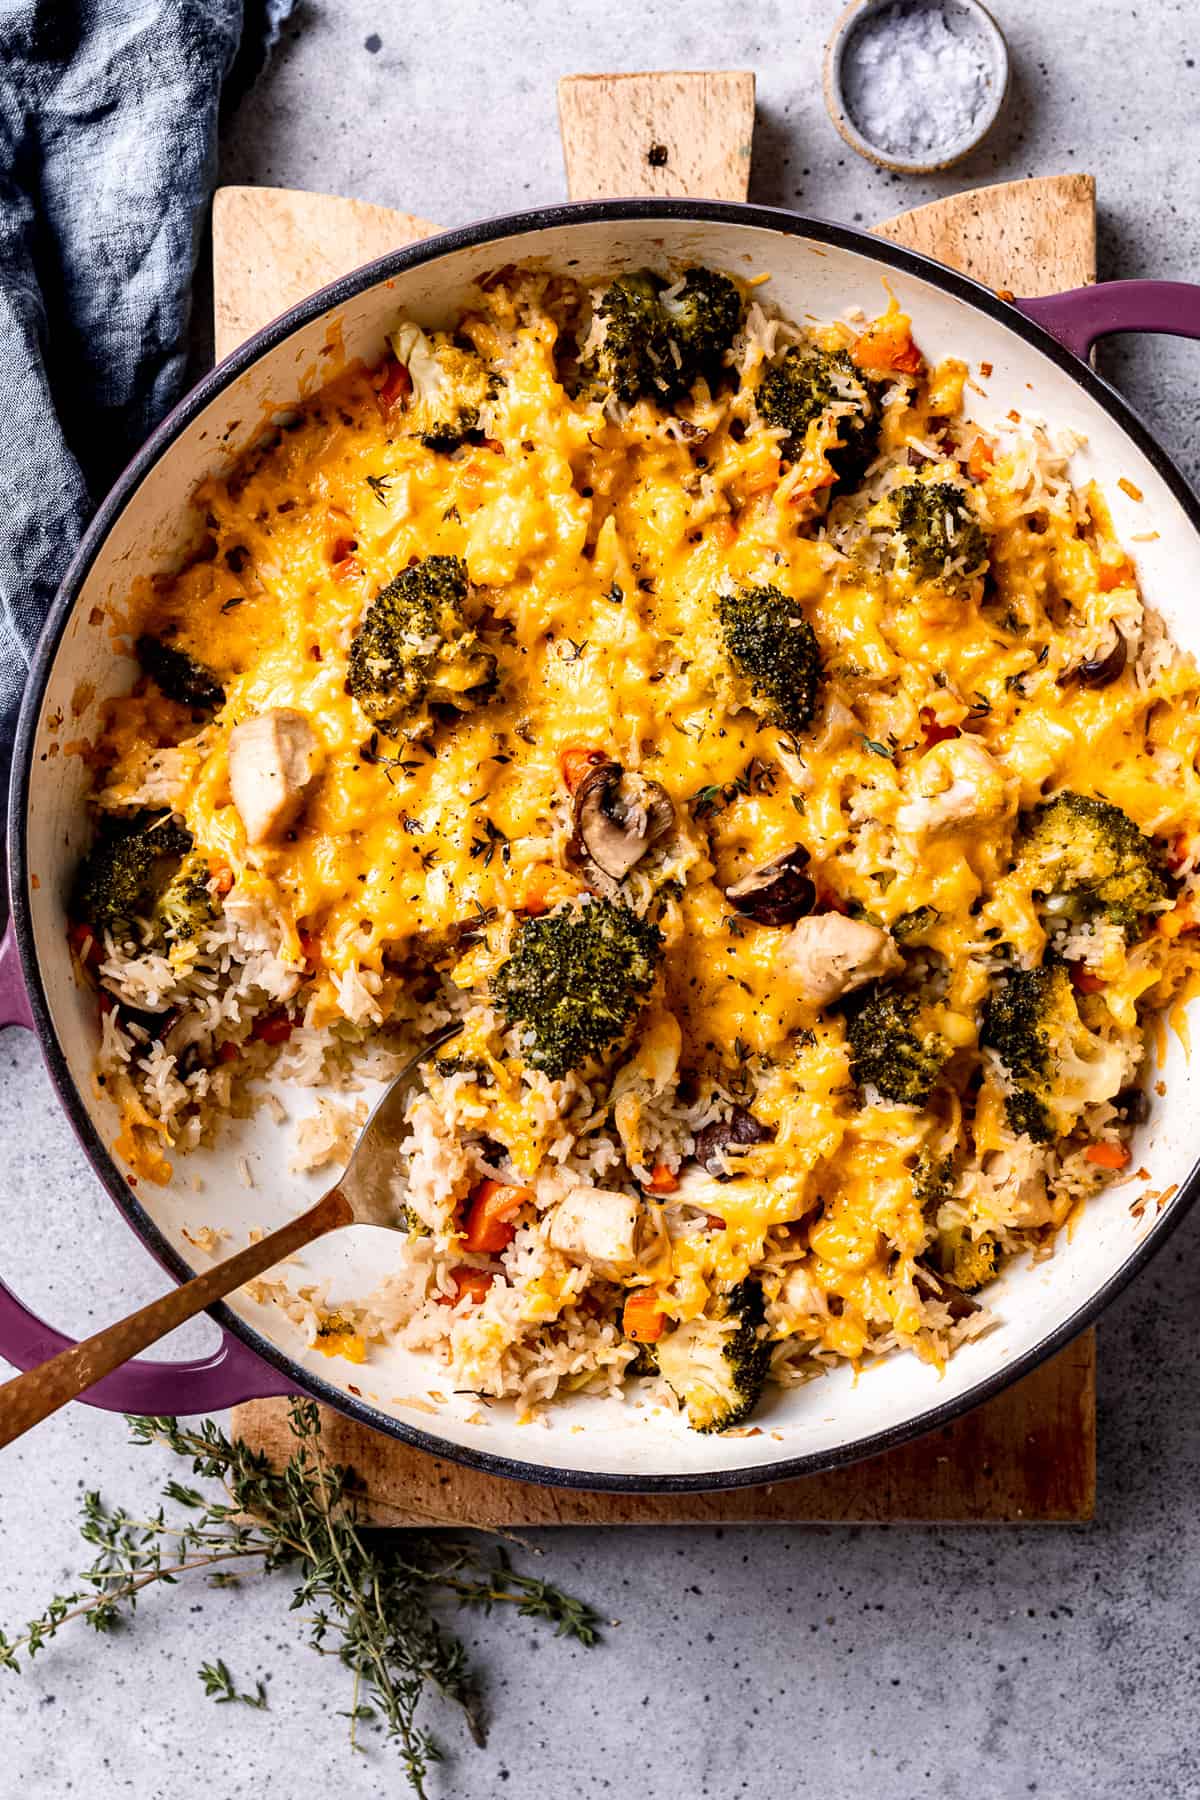 Chicken and broccoli bake with cheese and rice.